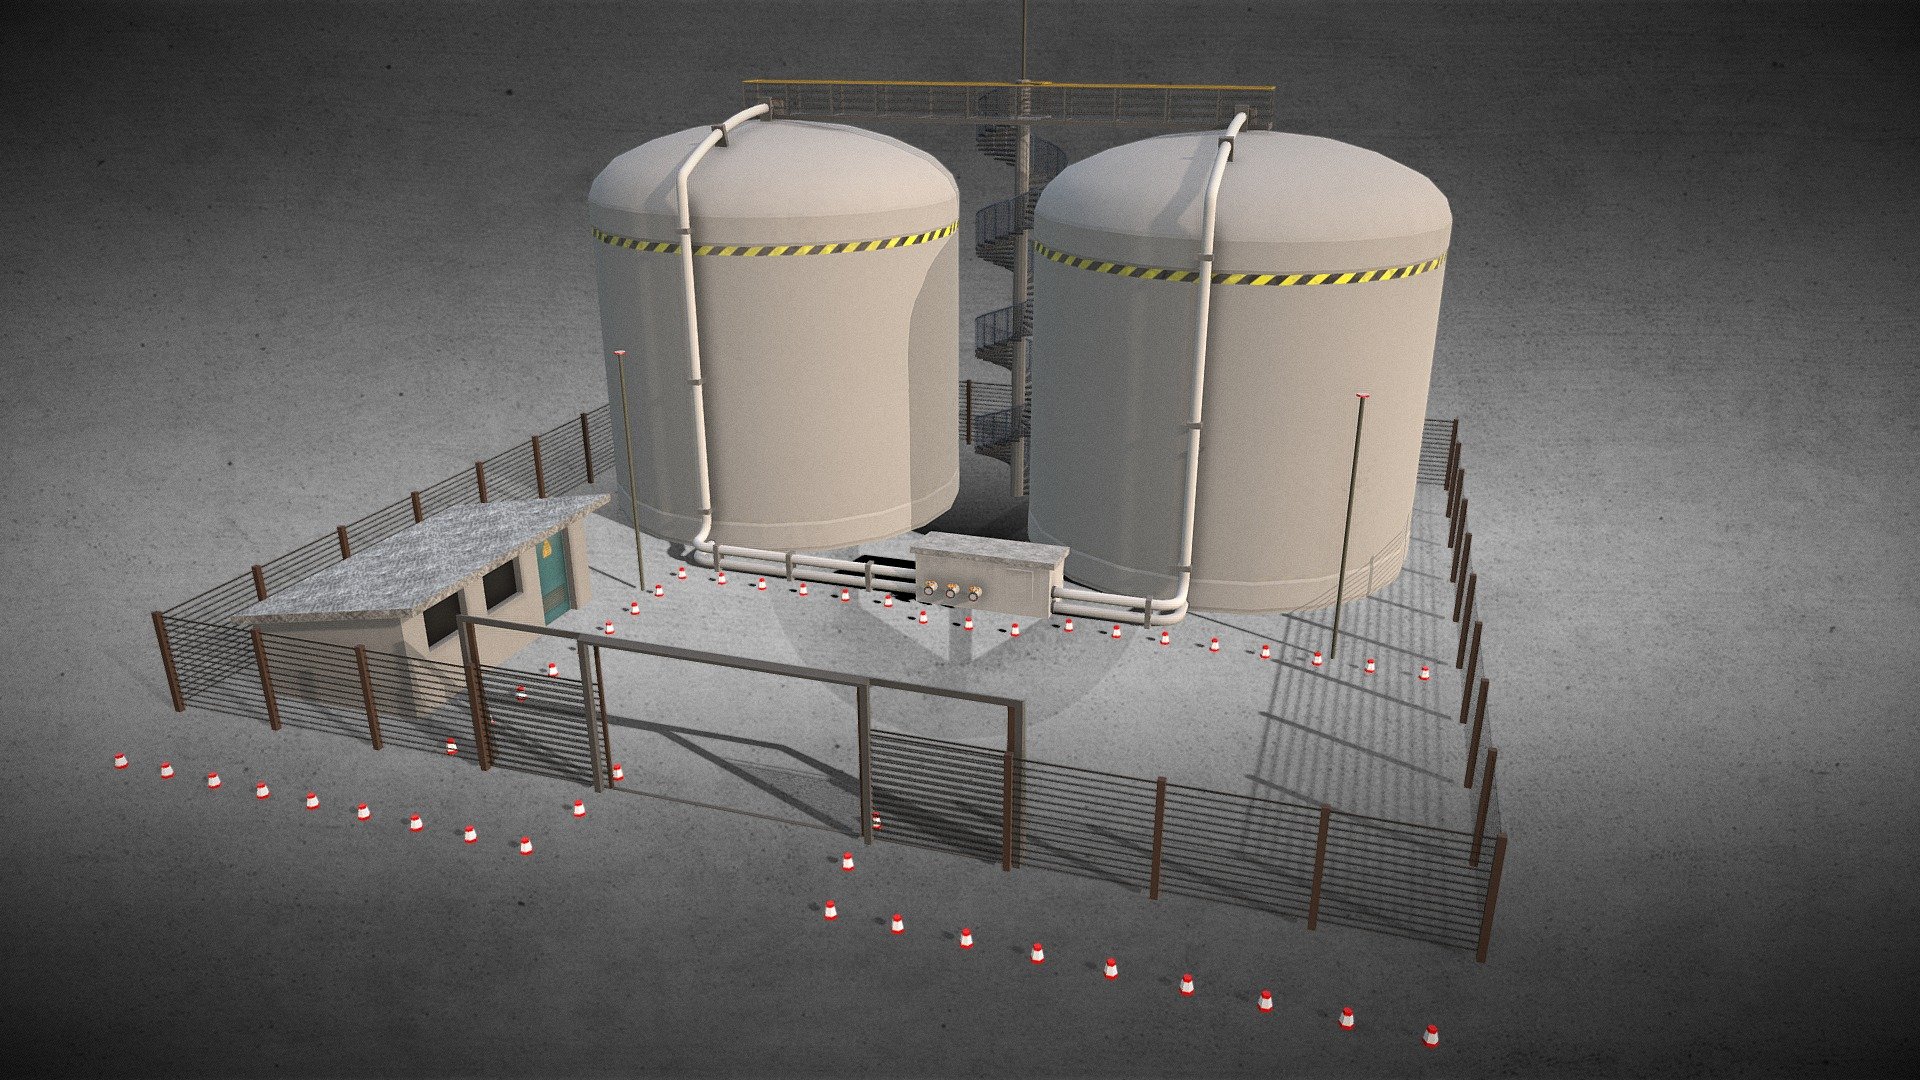 Double Oil Tank

Designed, created and adapted for the game &ldquo;Cities Skylines